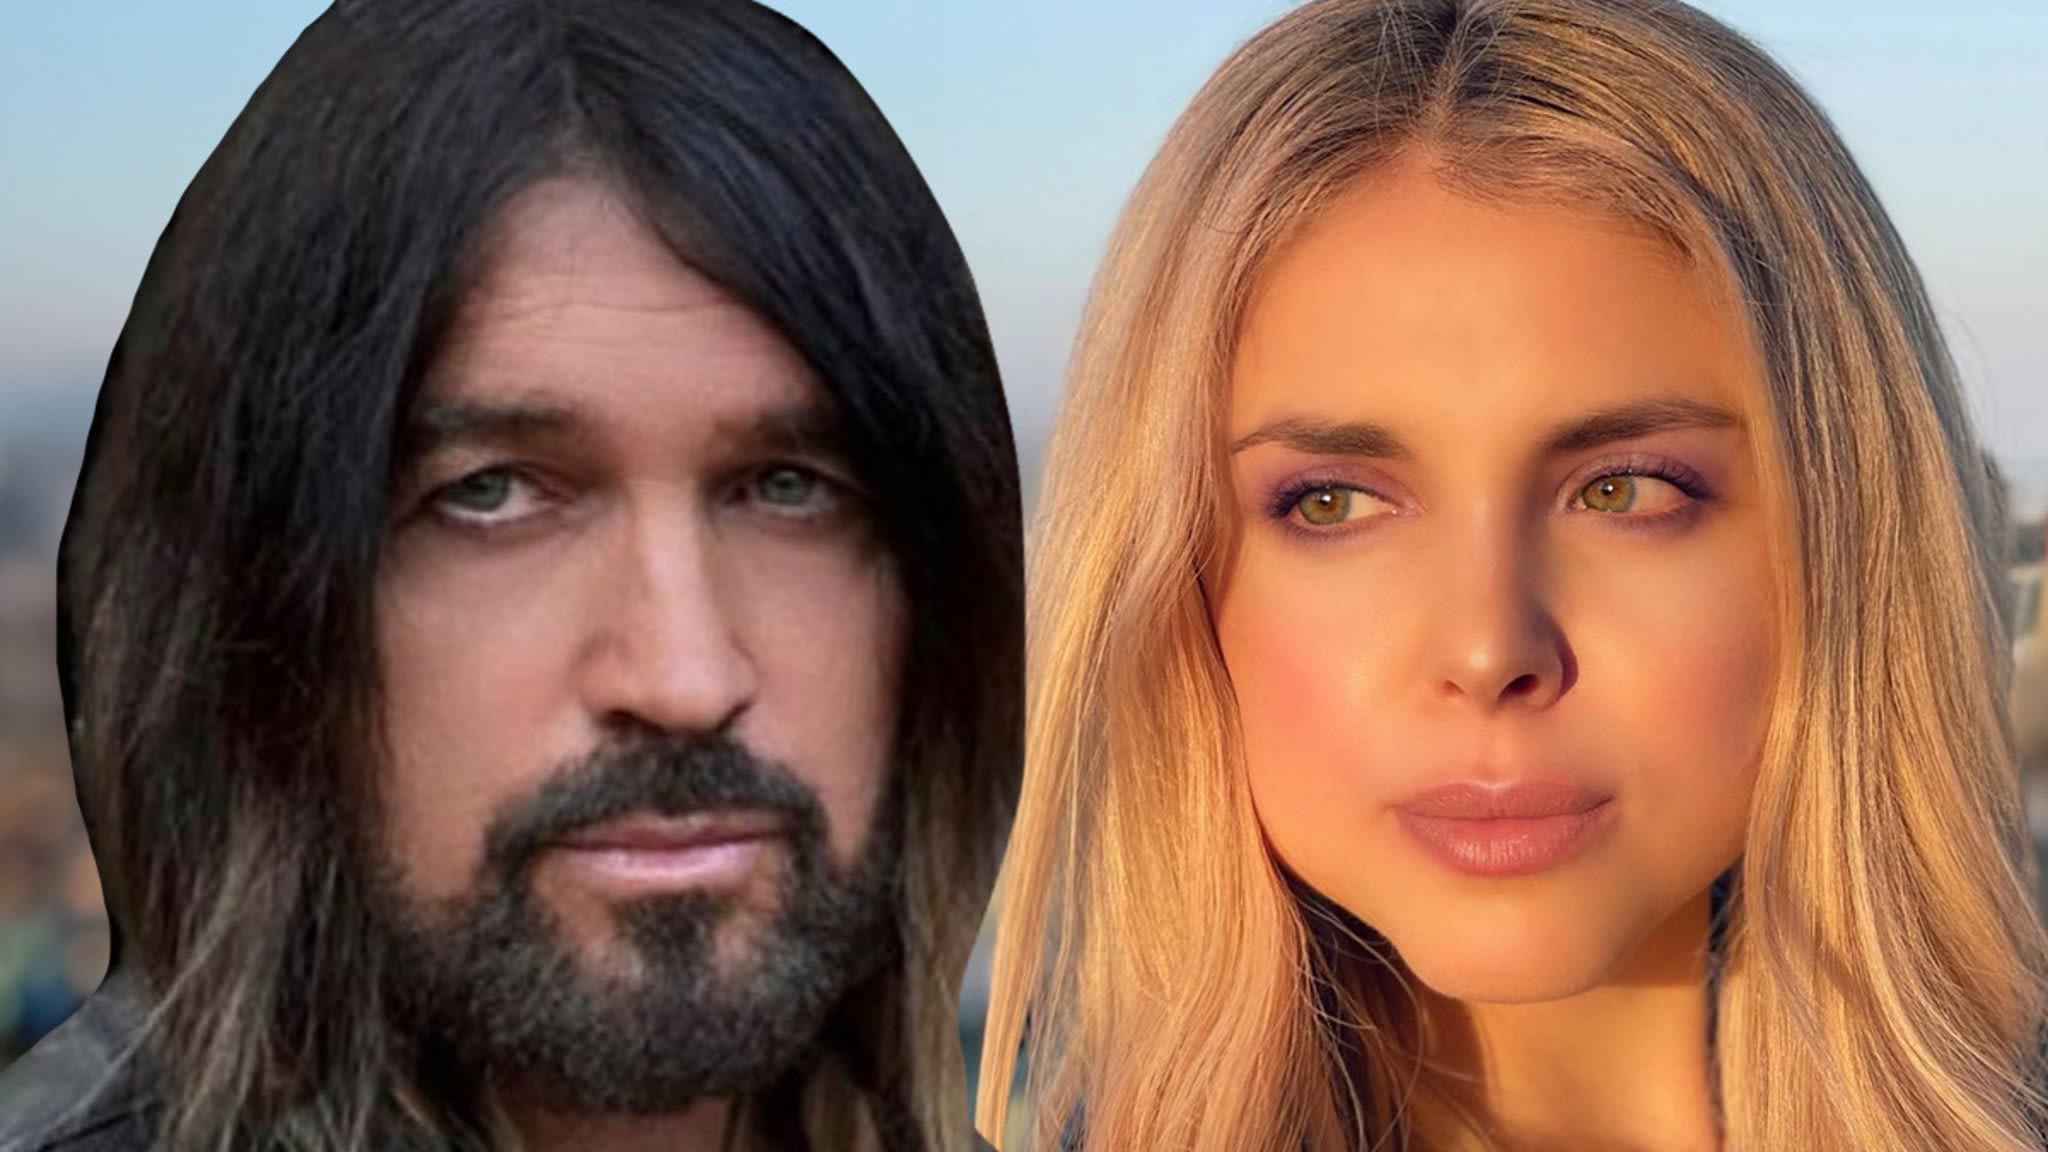 Billy Ray Cyrus Hesitant To Let Firerose Into Home To Retrieve Belongings